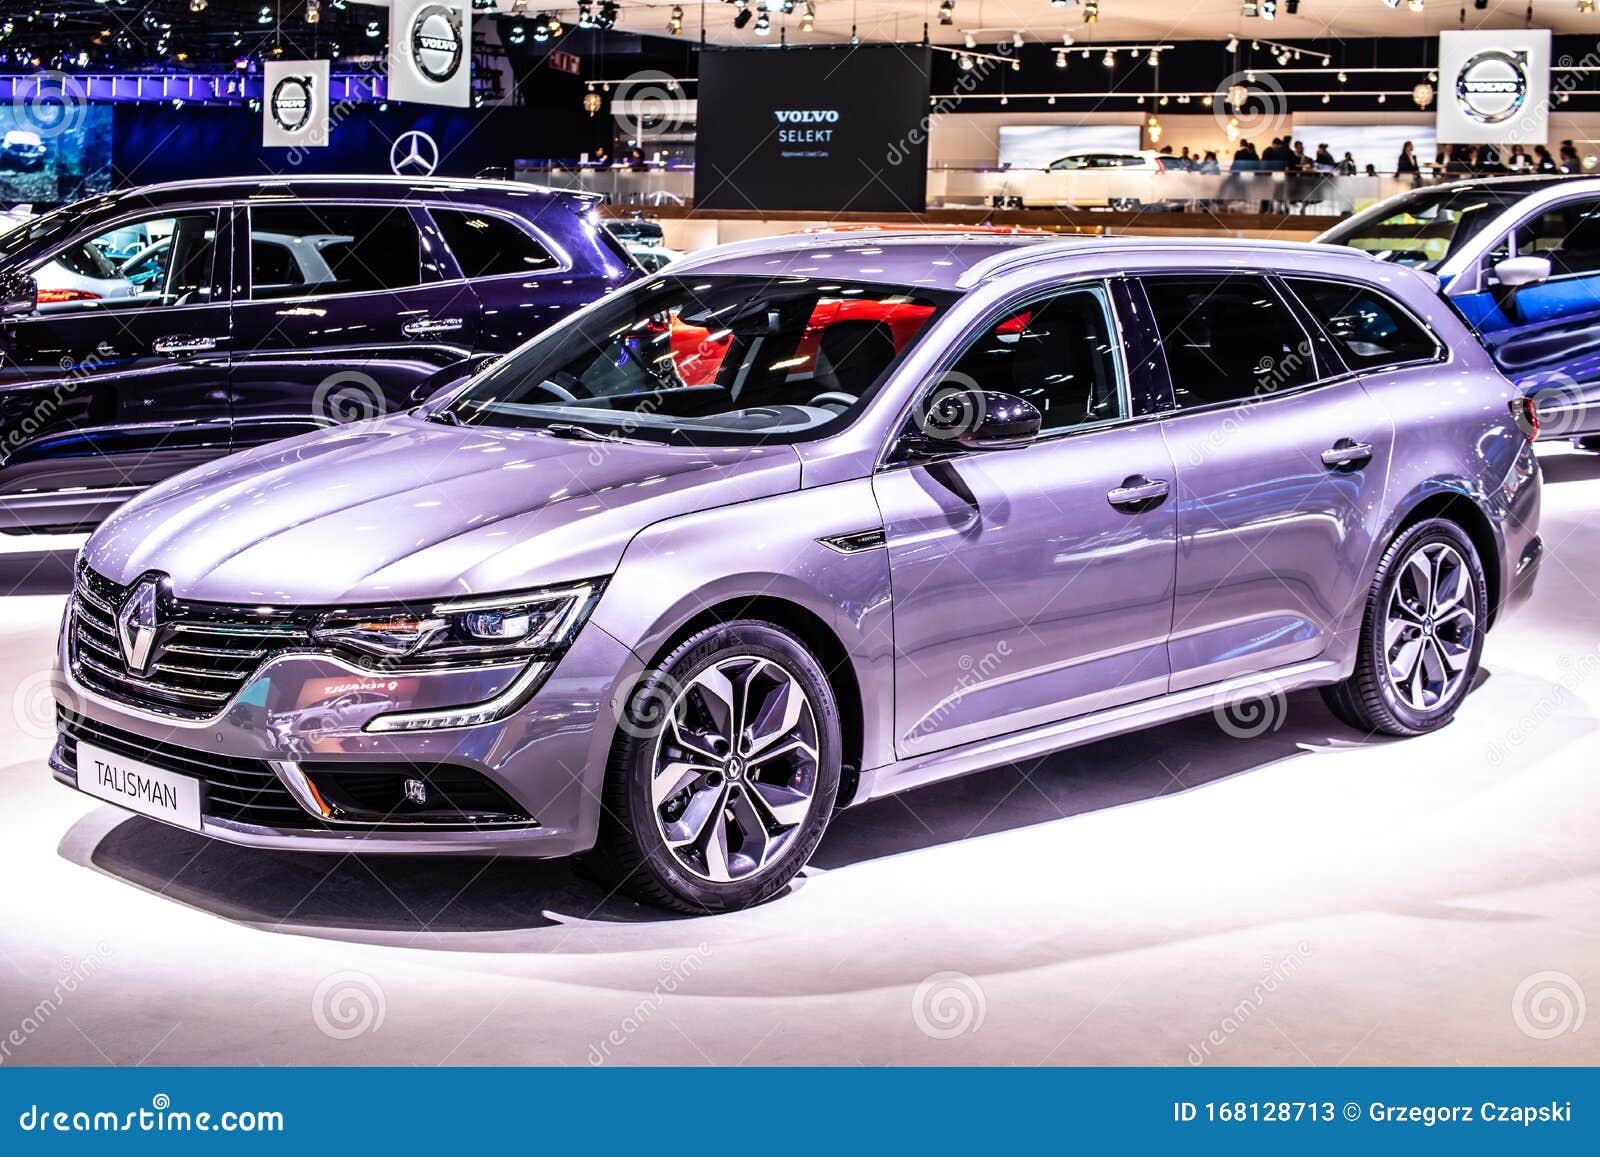 Silver Renault Talisman Grandtour at Brussels Motor Show, Combi Station Wagon Produced by Renault Photo - Image model: 168128713